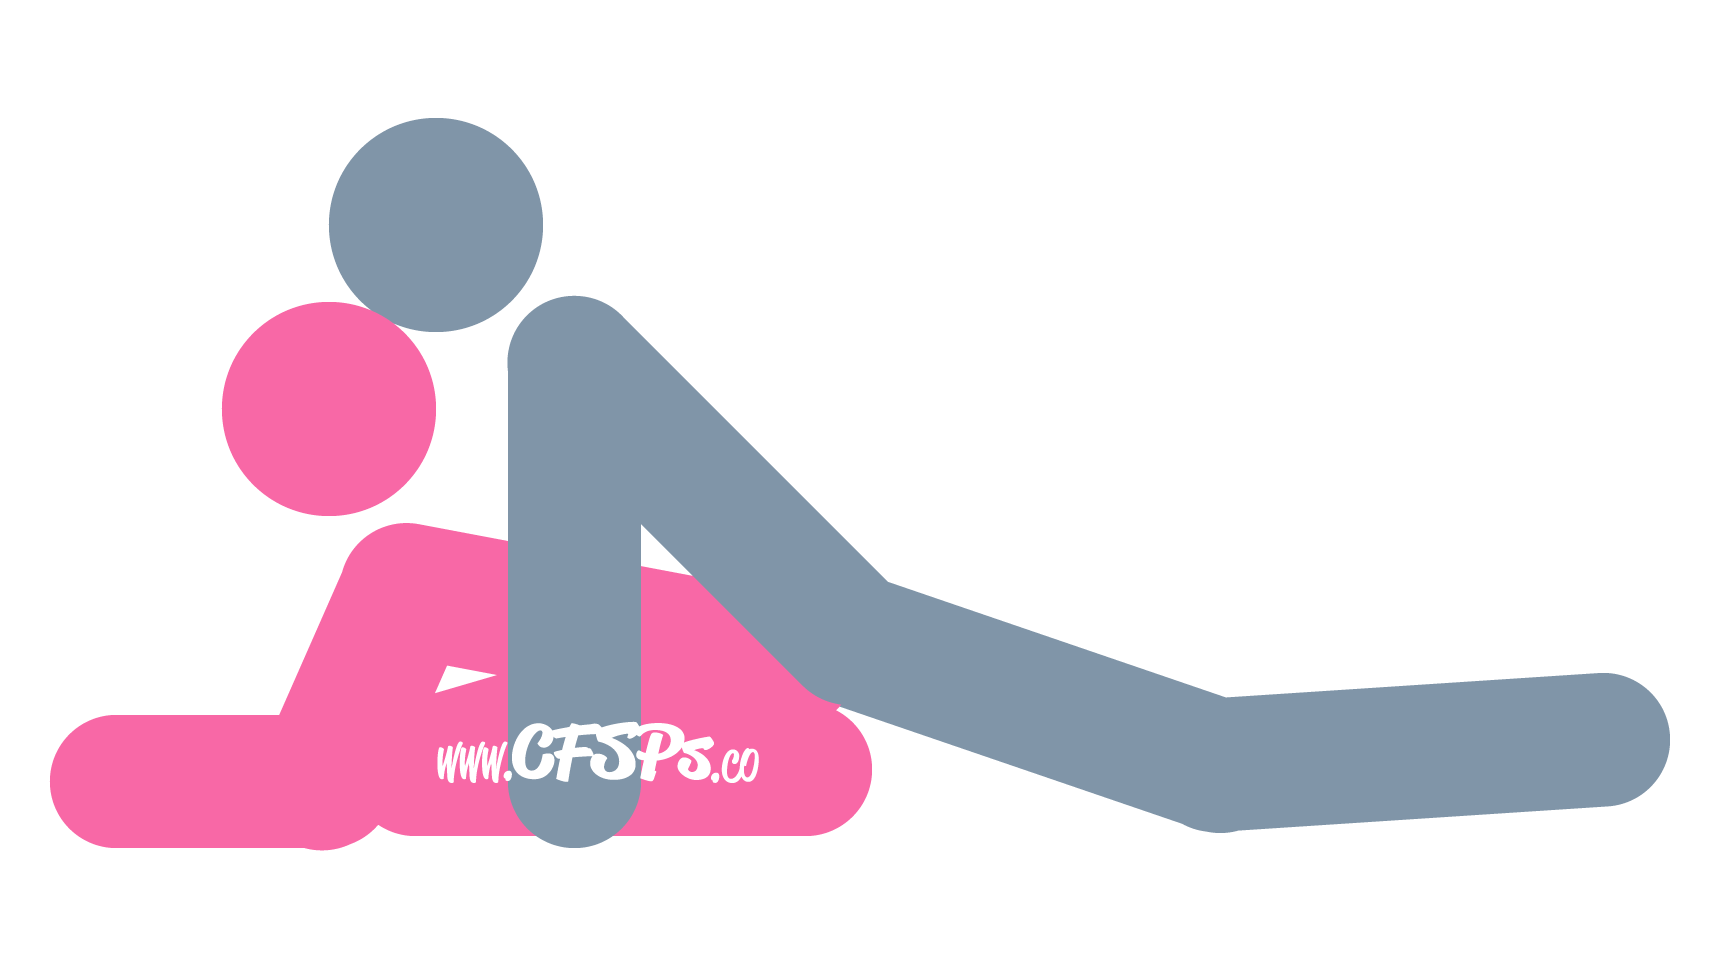 This stick figure image depicts a man and woman having sex in the Sphinx sex position. The woman is on all fours and crouched down with her elbows on the bed while her butt is touching her feet. One of her legs is straight out, perpendicular to her body. The man is positioned on his stomach with his legs straight out, pelvis near her butt, and he's supporting his upper body with her arms on the bed on each side of her.